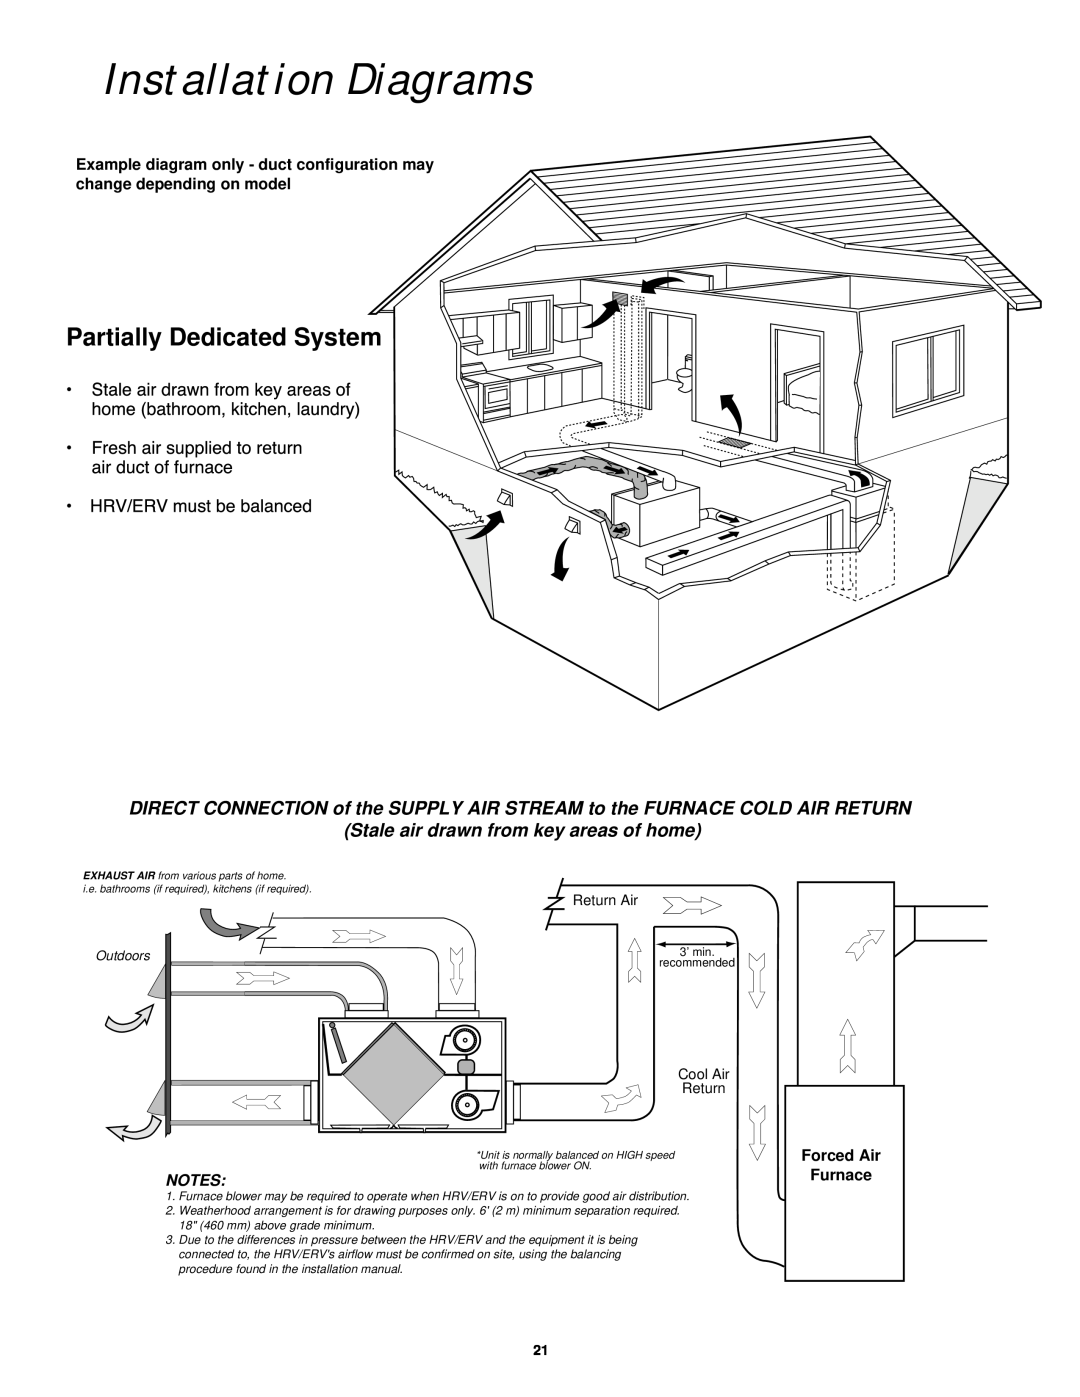 Lifebreath 300DCS Installation Diagrams, Partially Dedicated System, Stale air drawn from key areas of home, Outdoors 